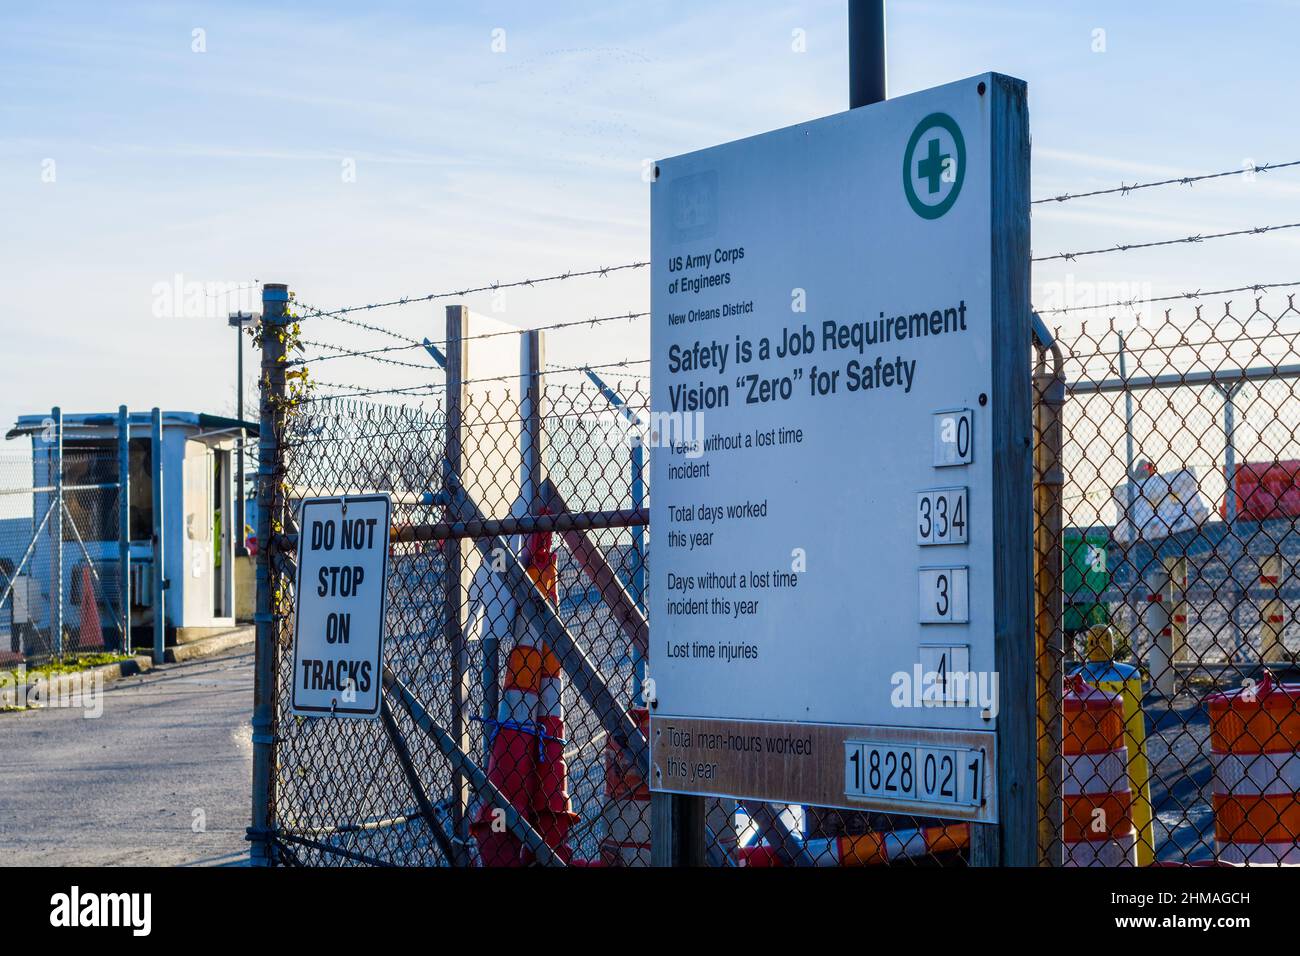 NEW ORLEANS, LA, USA - JANUARY 27, 2022: Sign showing safety record at gate to U.S. Army Corps of Engineers building and 'Do Not Stop on Track' sign Stock Photo